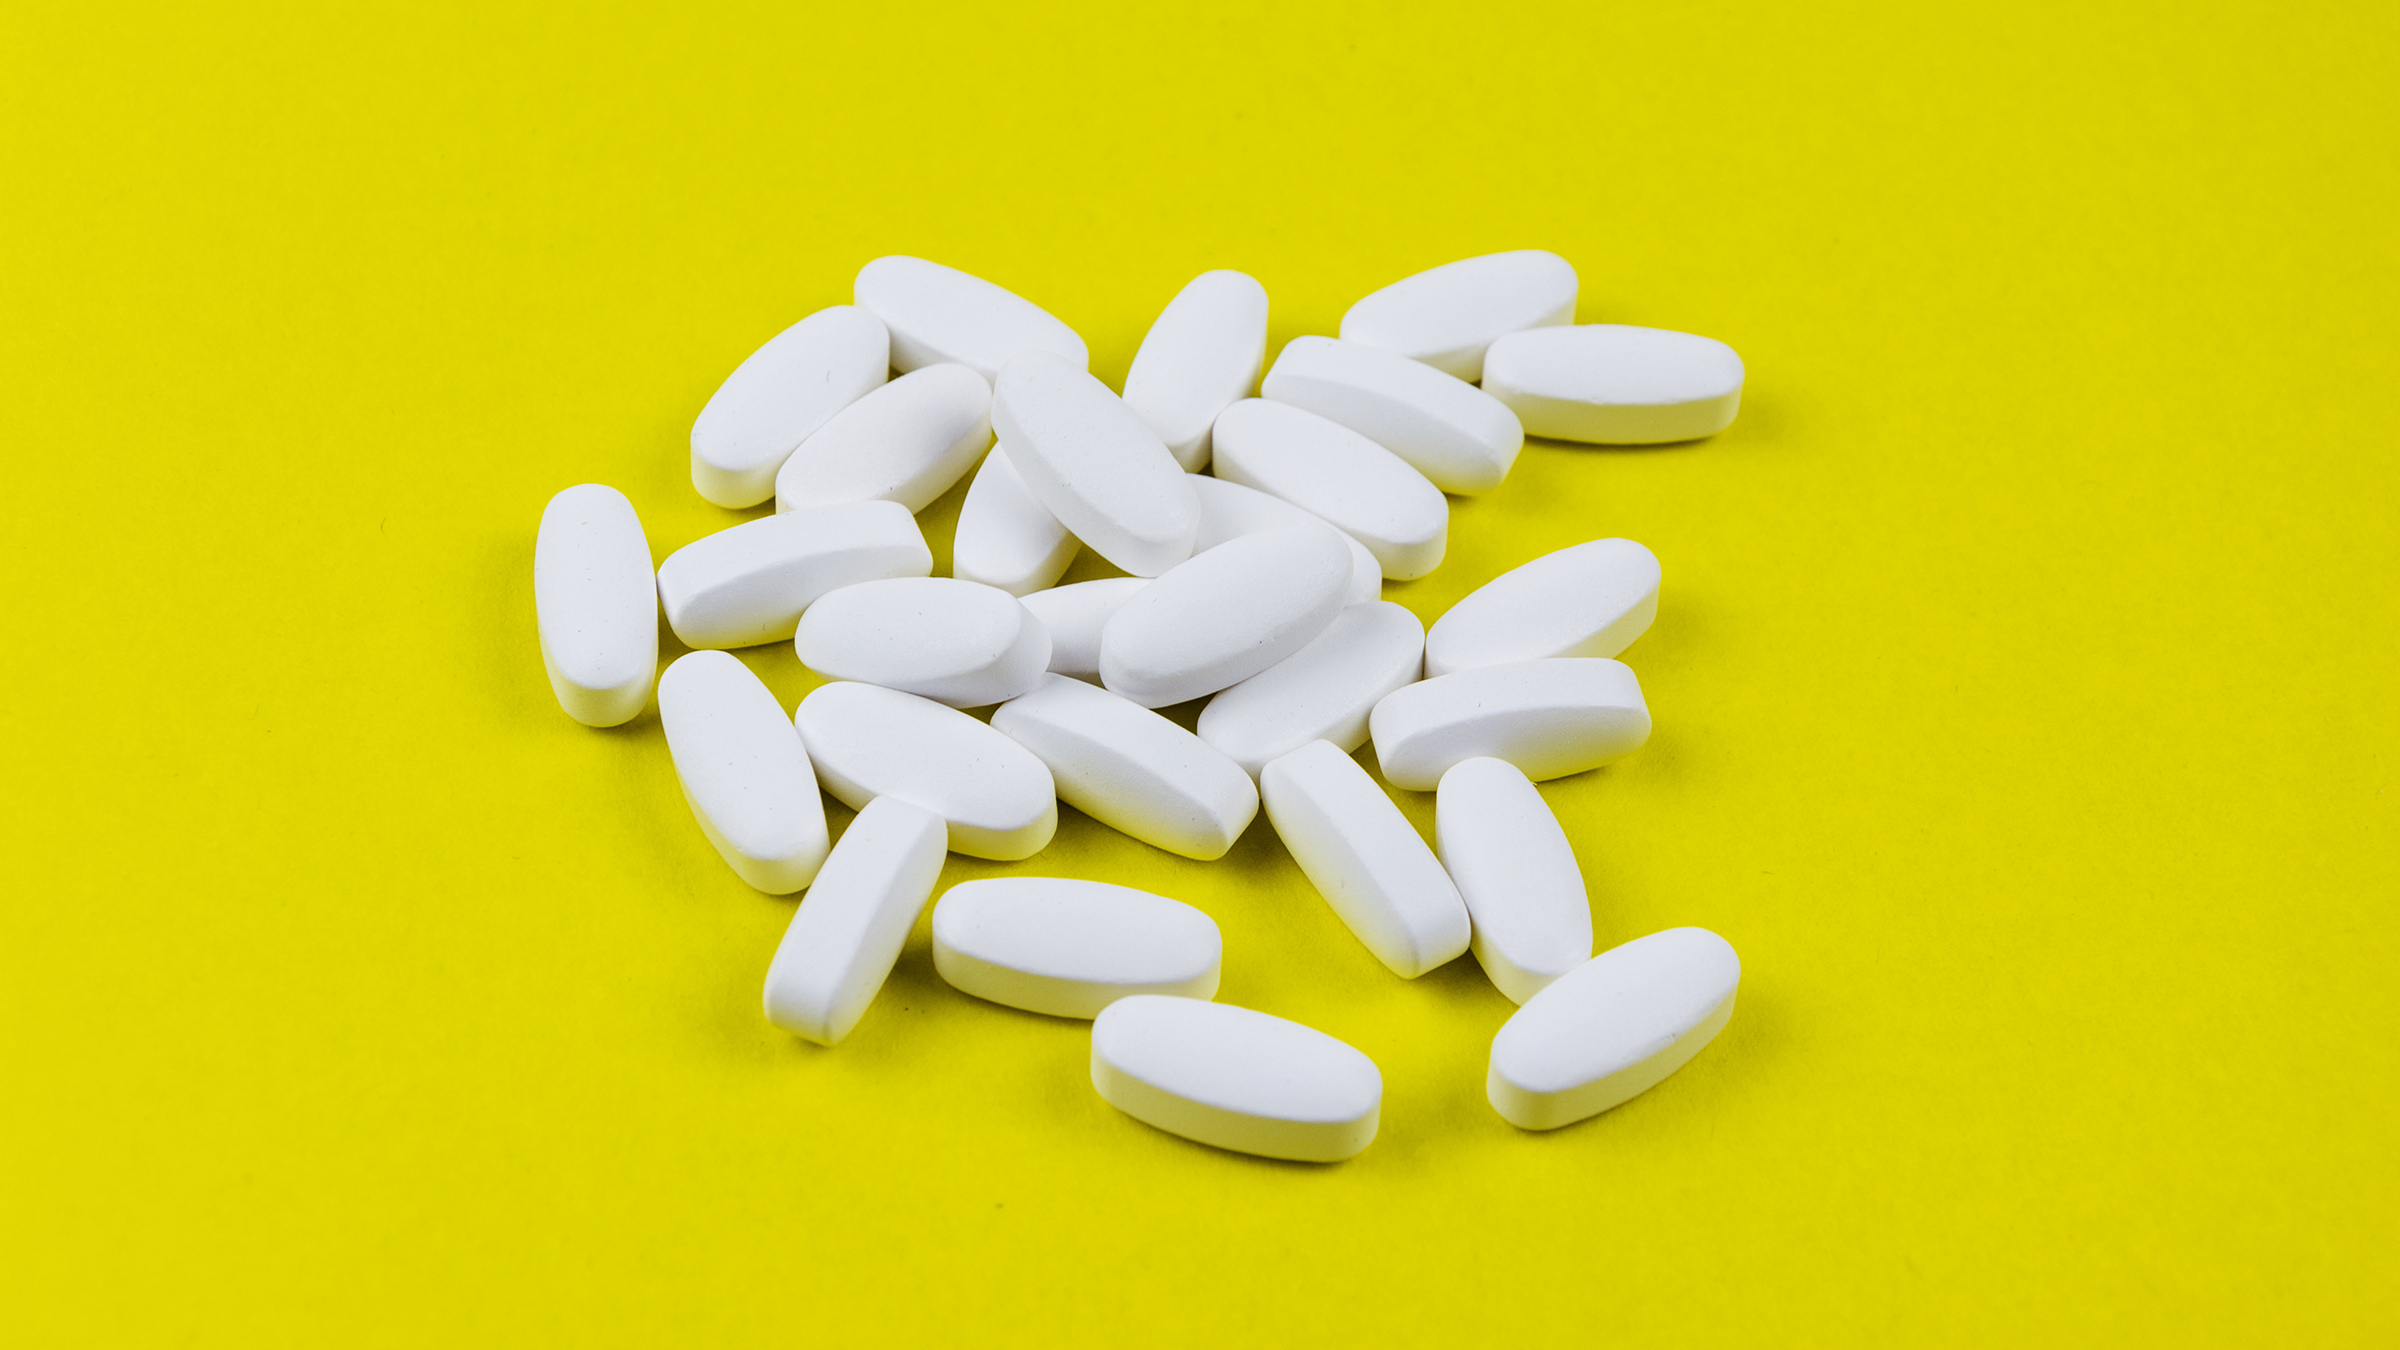 Cyclobenzaprine (Flexeril): Uses, Side Effects, Interactions & More - GoodRx